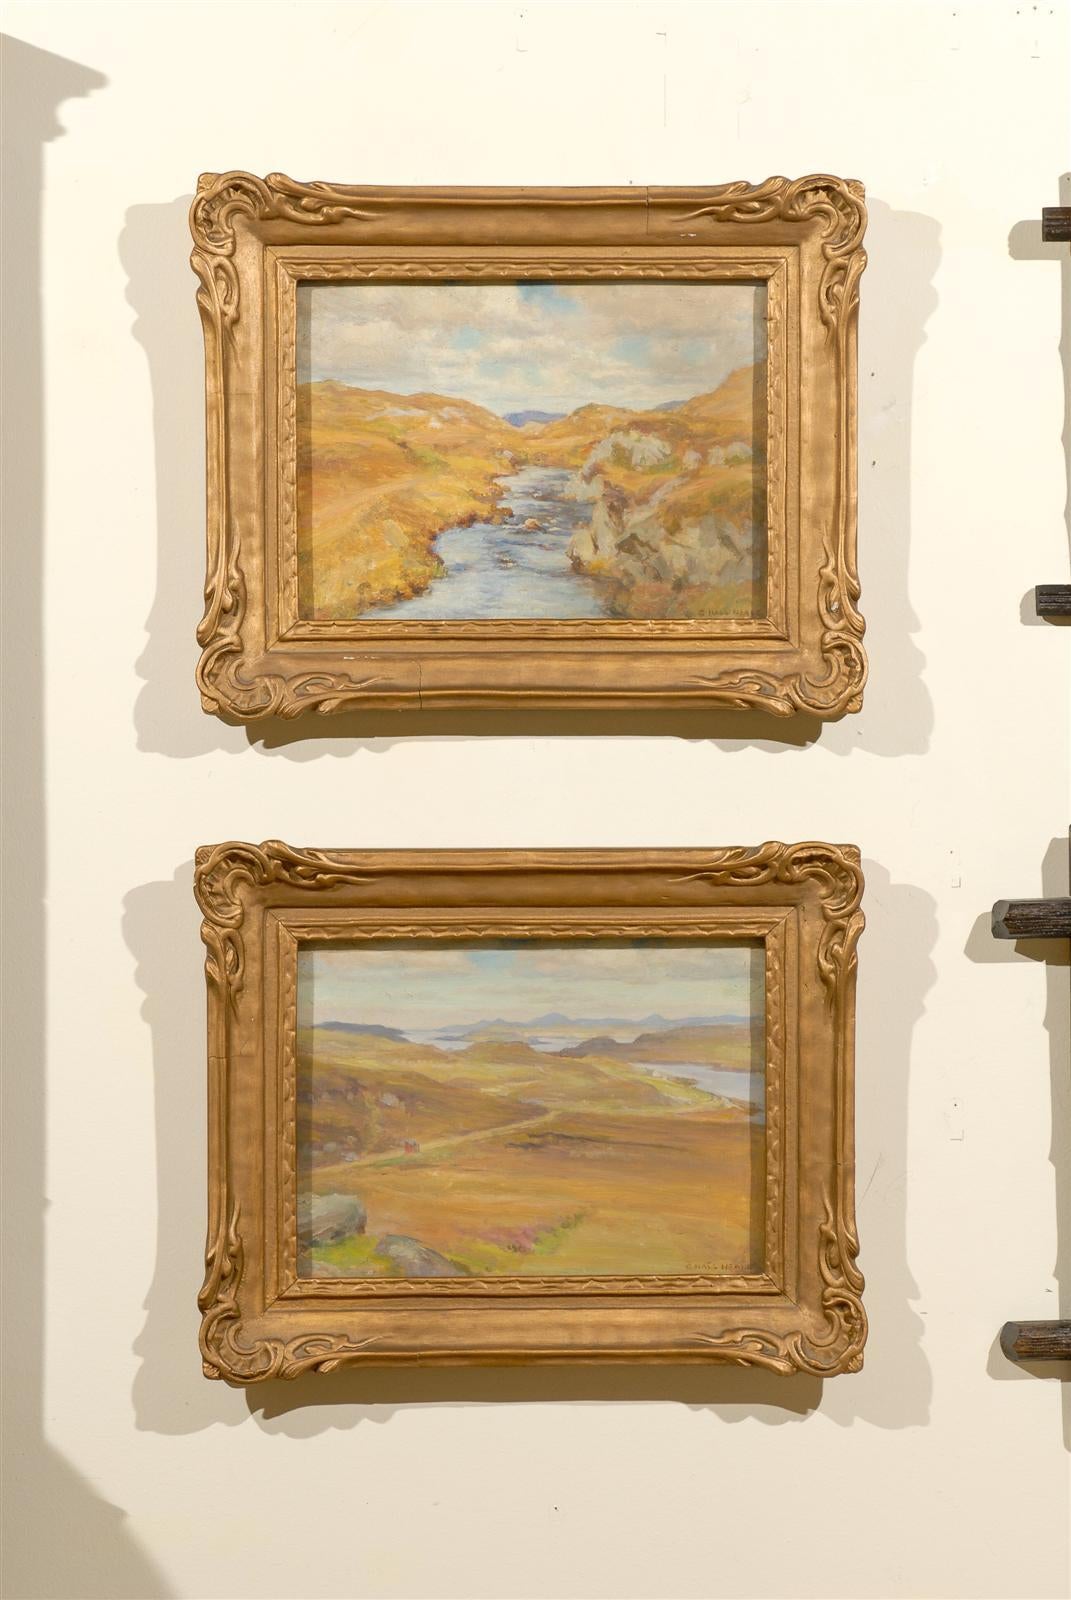 These are two original paintings by George Hall-Neale.  He lived from 1863 - 1940 in Britain he was known for painting portraits but painted landscapes as well.  The top image is titled "A Moorlands Stream" and the bottom painting is